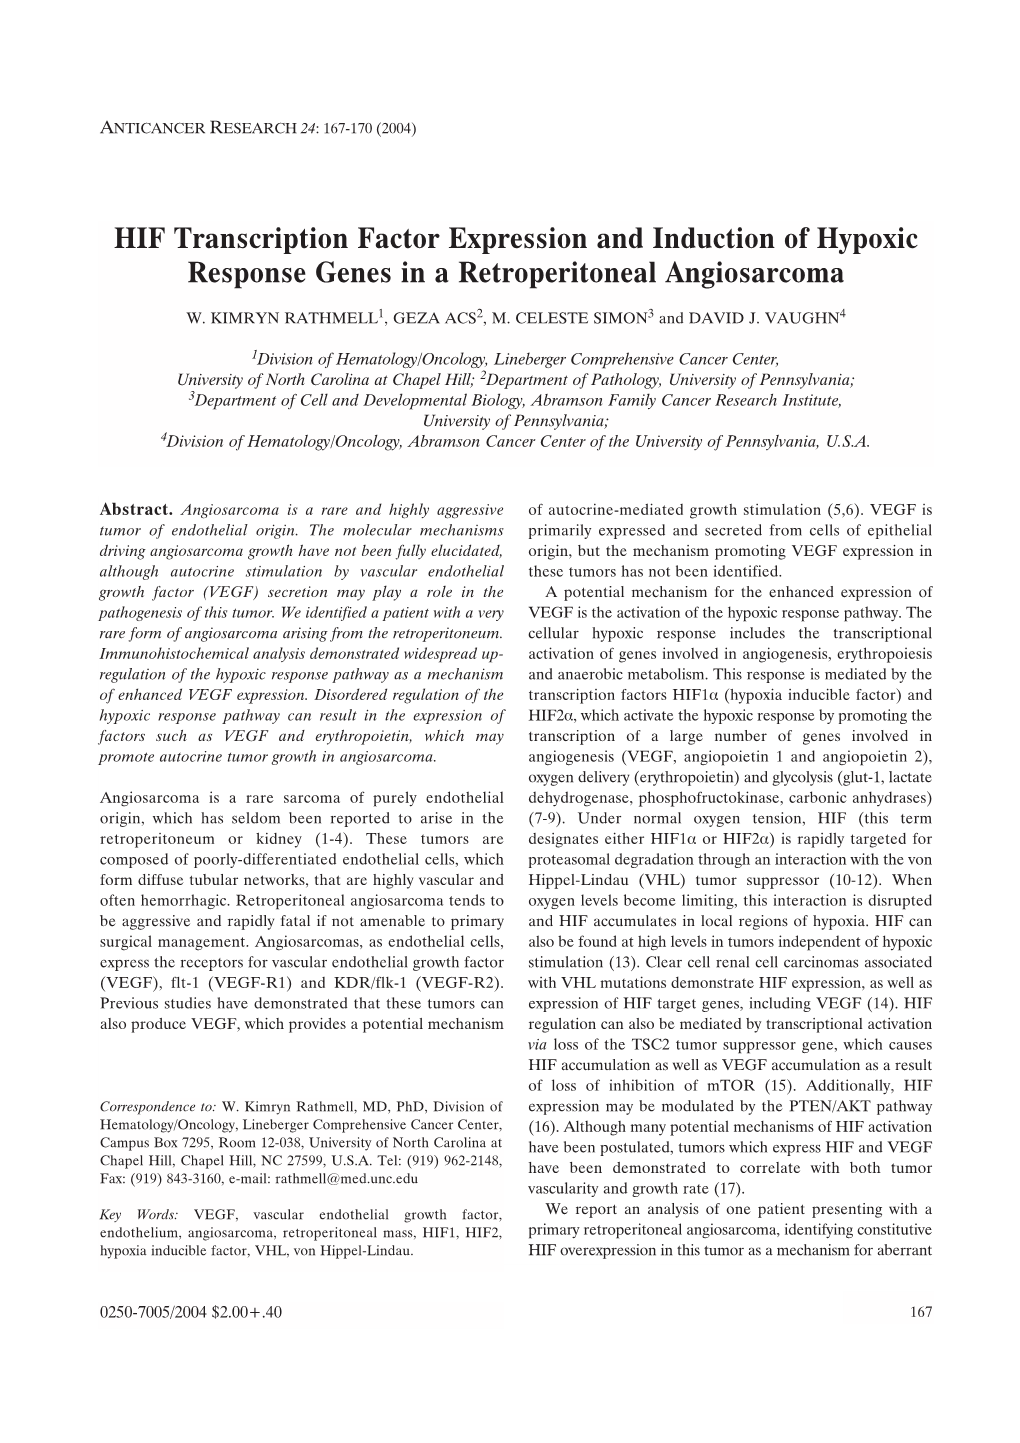 HIF Transcription Factor Expression and Induction of Hypoxic Response Genes in a Retroperitoneal Angiosarcoma